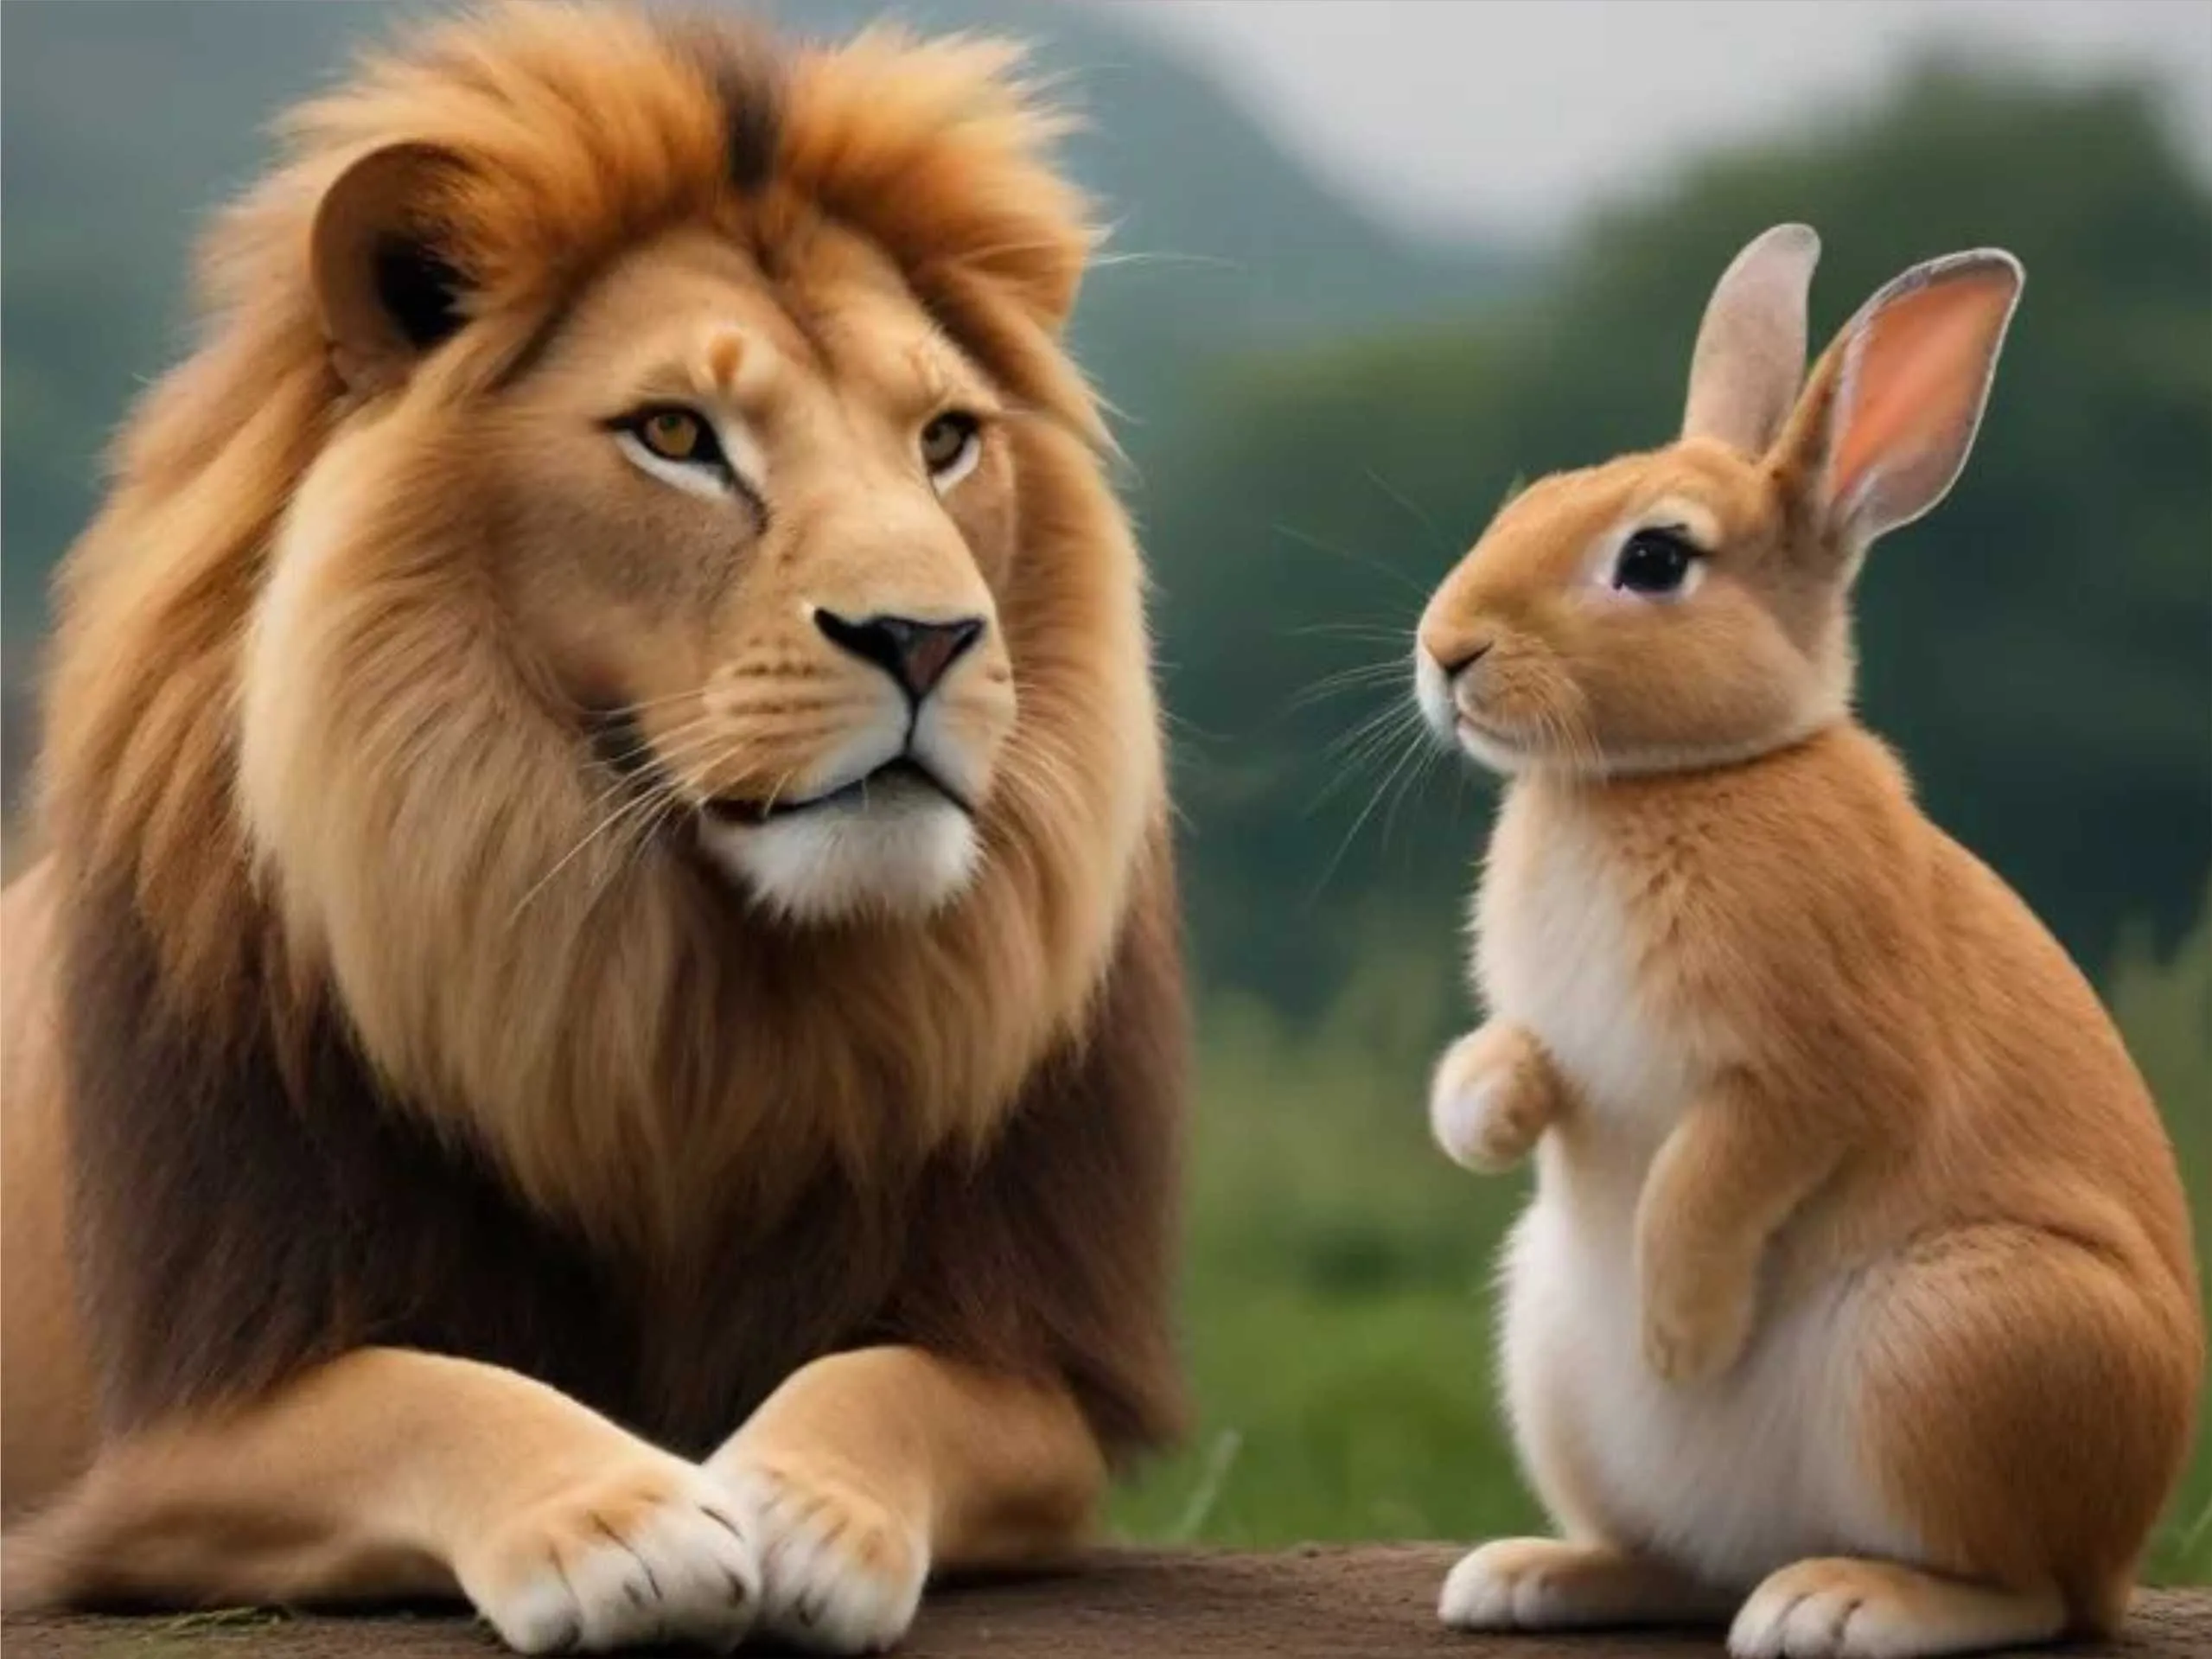 cartoon image of a rabbit and a lion